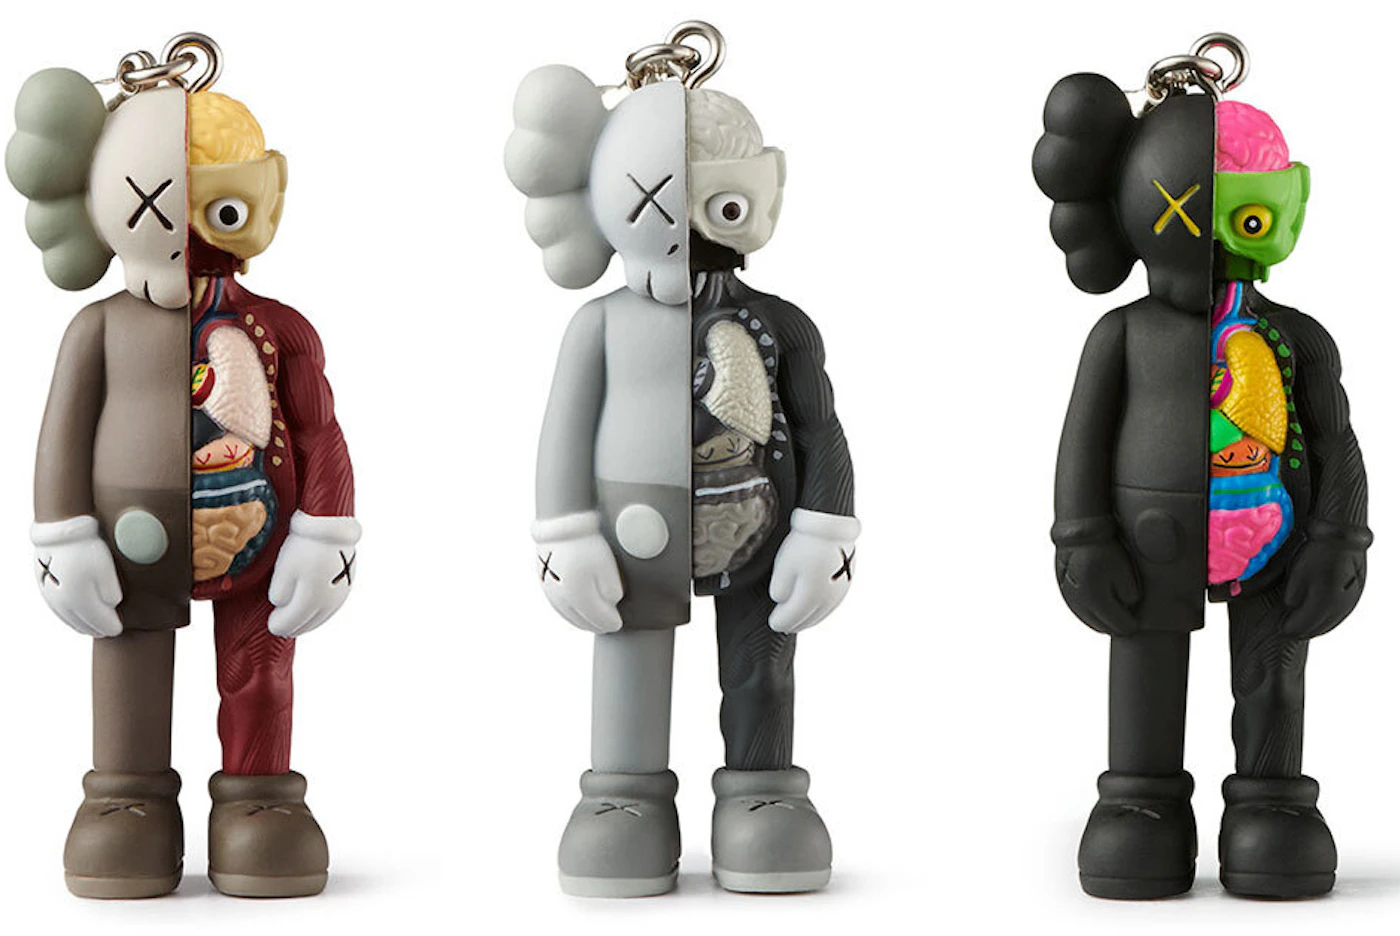 https://images.stockx.com/images/KAWS-Tokyo-First-Flayed-Companion-Keychain-Brown-Gray-Black-Set-2021.jpg?fit=fill&bg=FFFFFF&w=700&h=500&fm=webp&auto=compress&q=90&dpr=2&trim=color&updated_at=1626395917